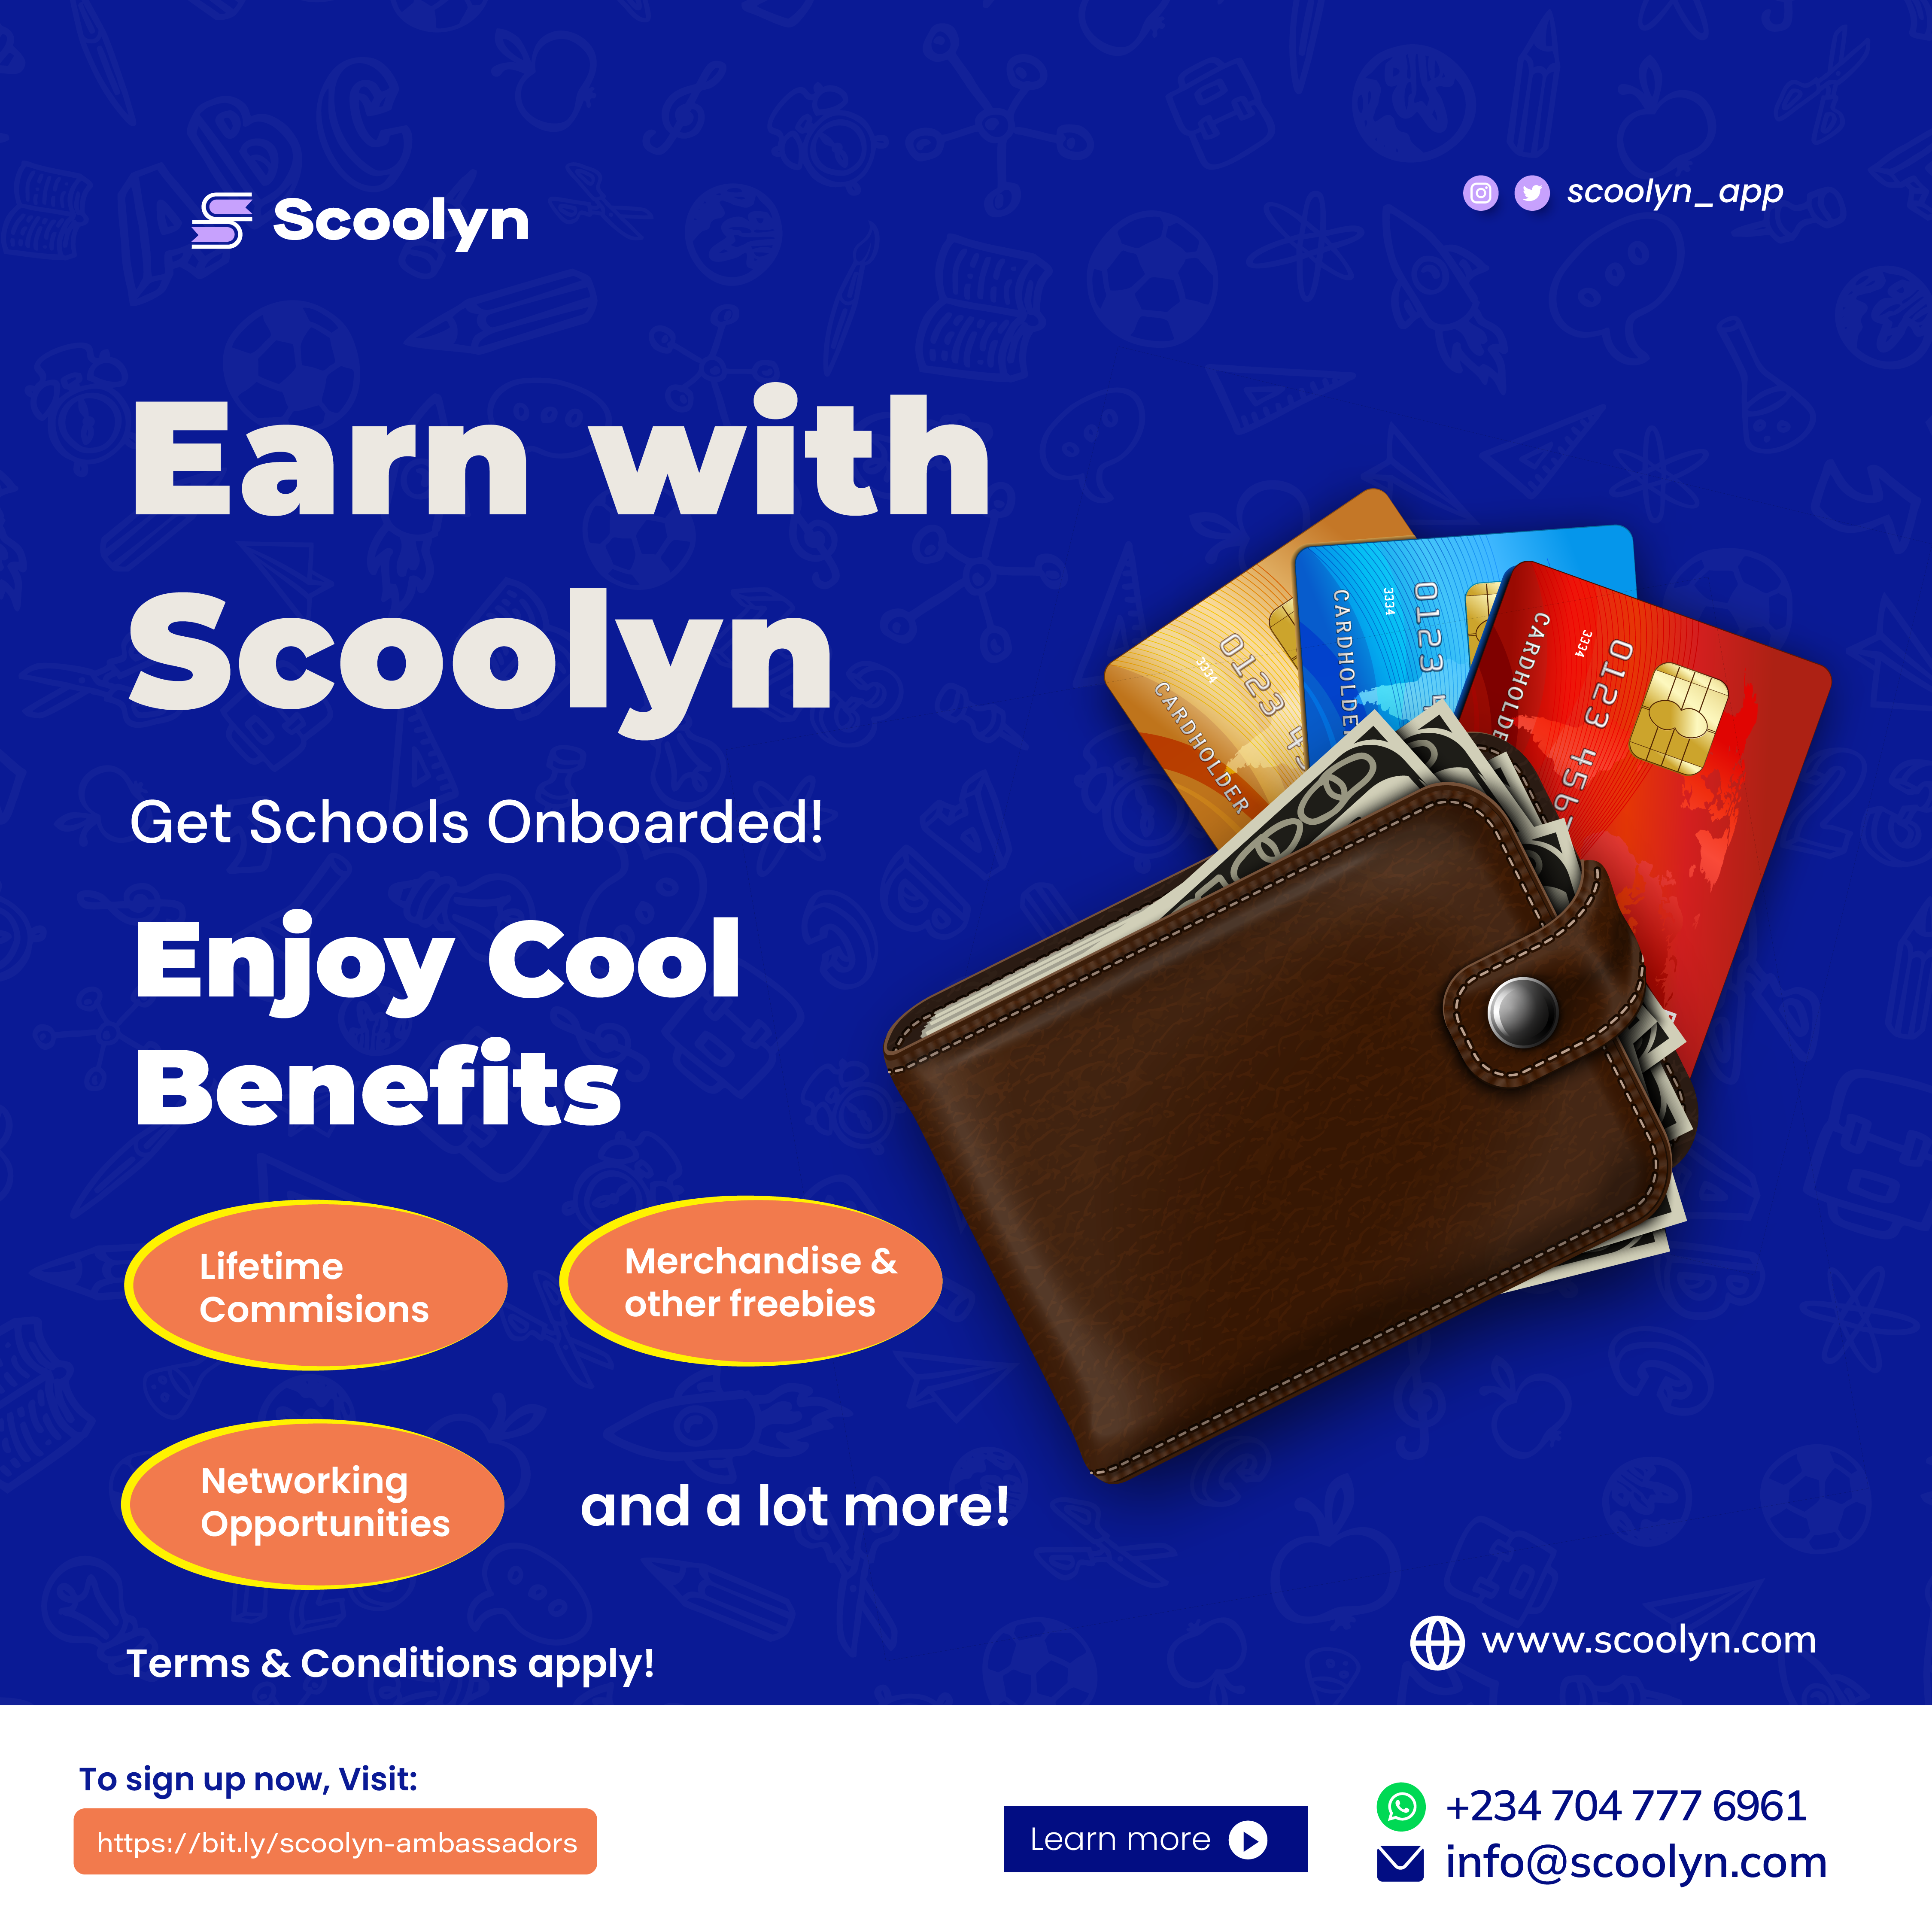 Earn with Scoolyn